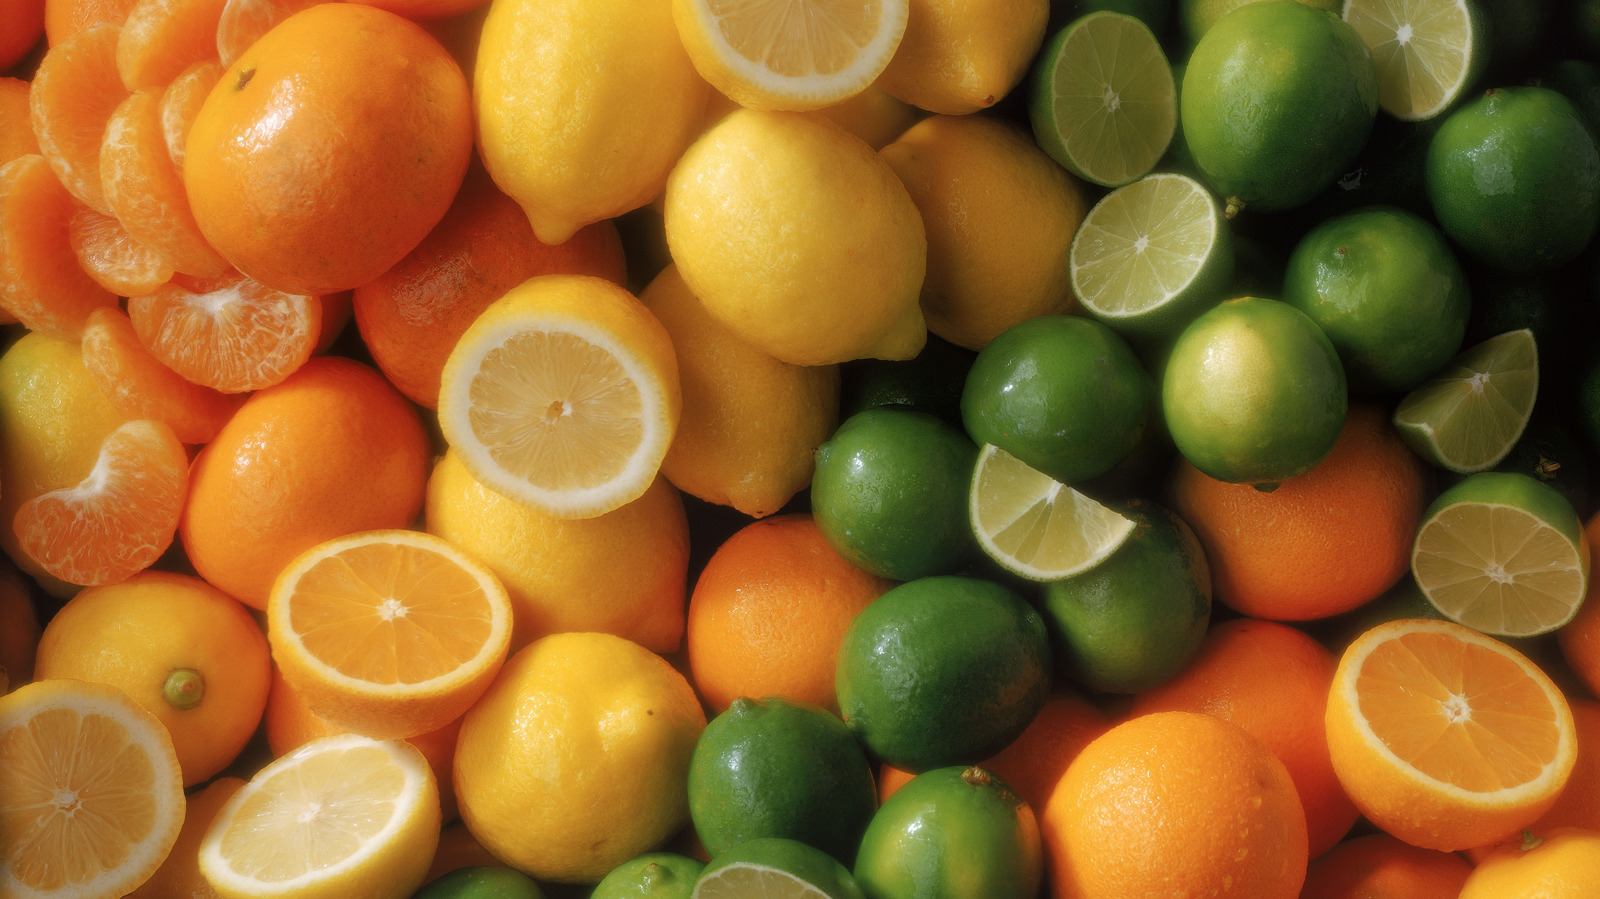 https://www.foodrepublic.com/img/gallery/know-these-12-citrus-varieties-and-when-they-are-in-season/l-intro-1684528117.jpg